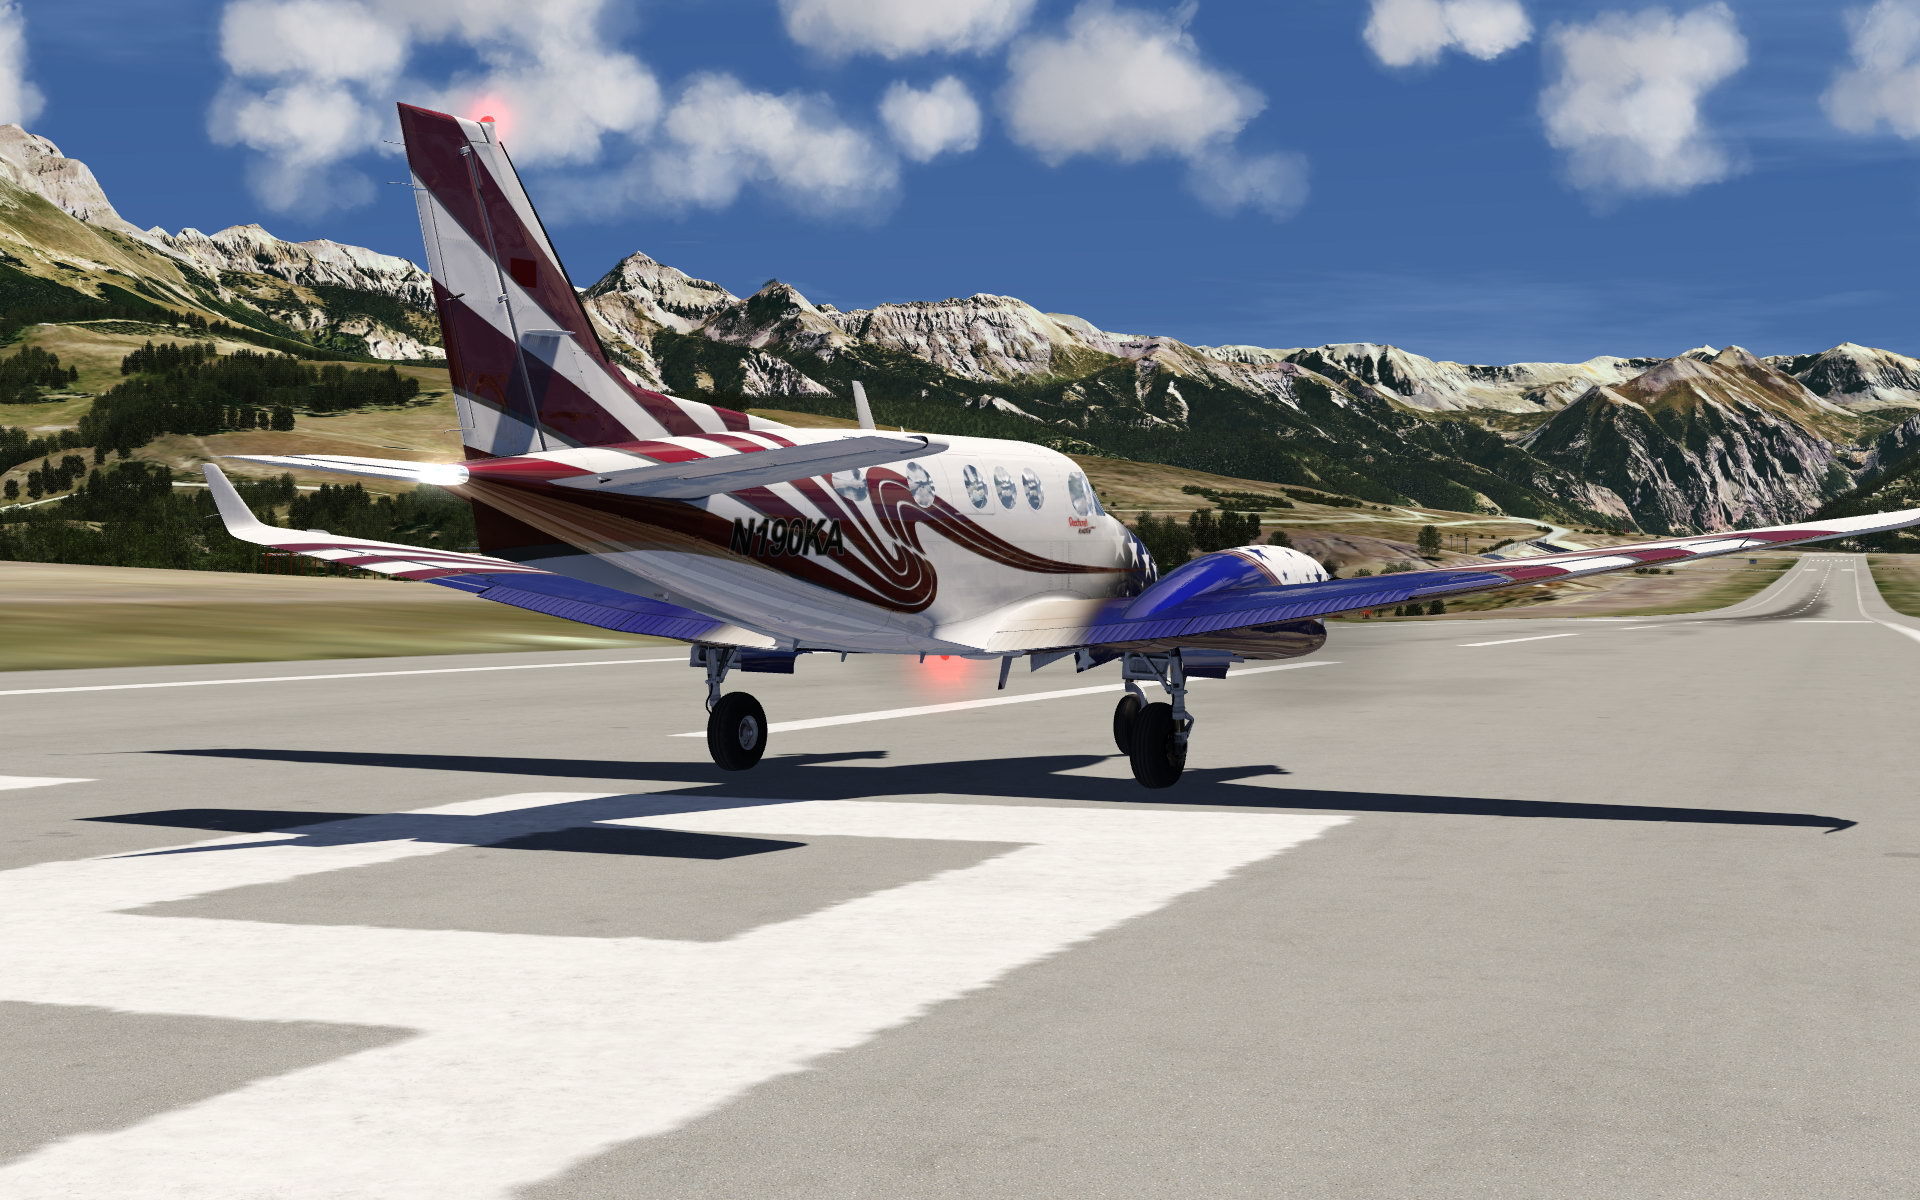 fsx steam edition cracked for mac and multiplayer